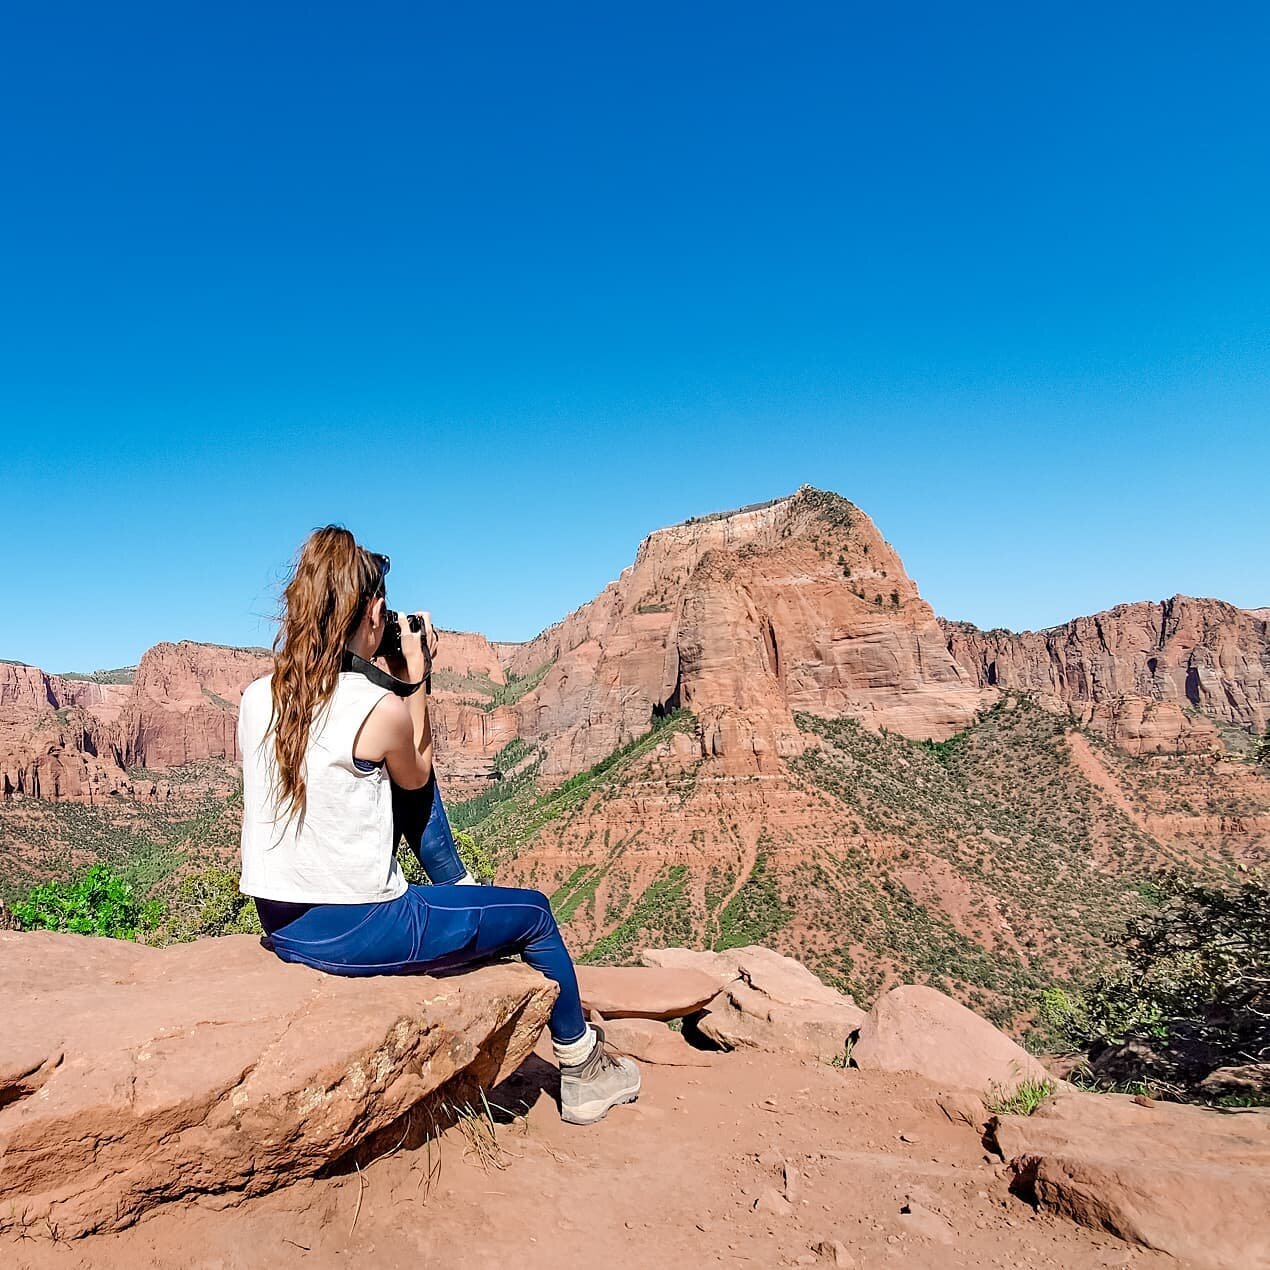 Have you heard of Kolob Canyon? Save this for your next trip to Zion National Park.

Anyone who's been to Zion lately knows how popular and crowded the park has gotten.

That's why I love the lesser-visited Kolob Canyon section of the park that's abo